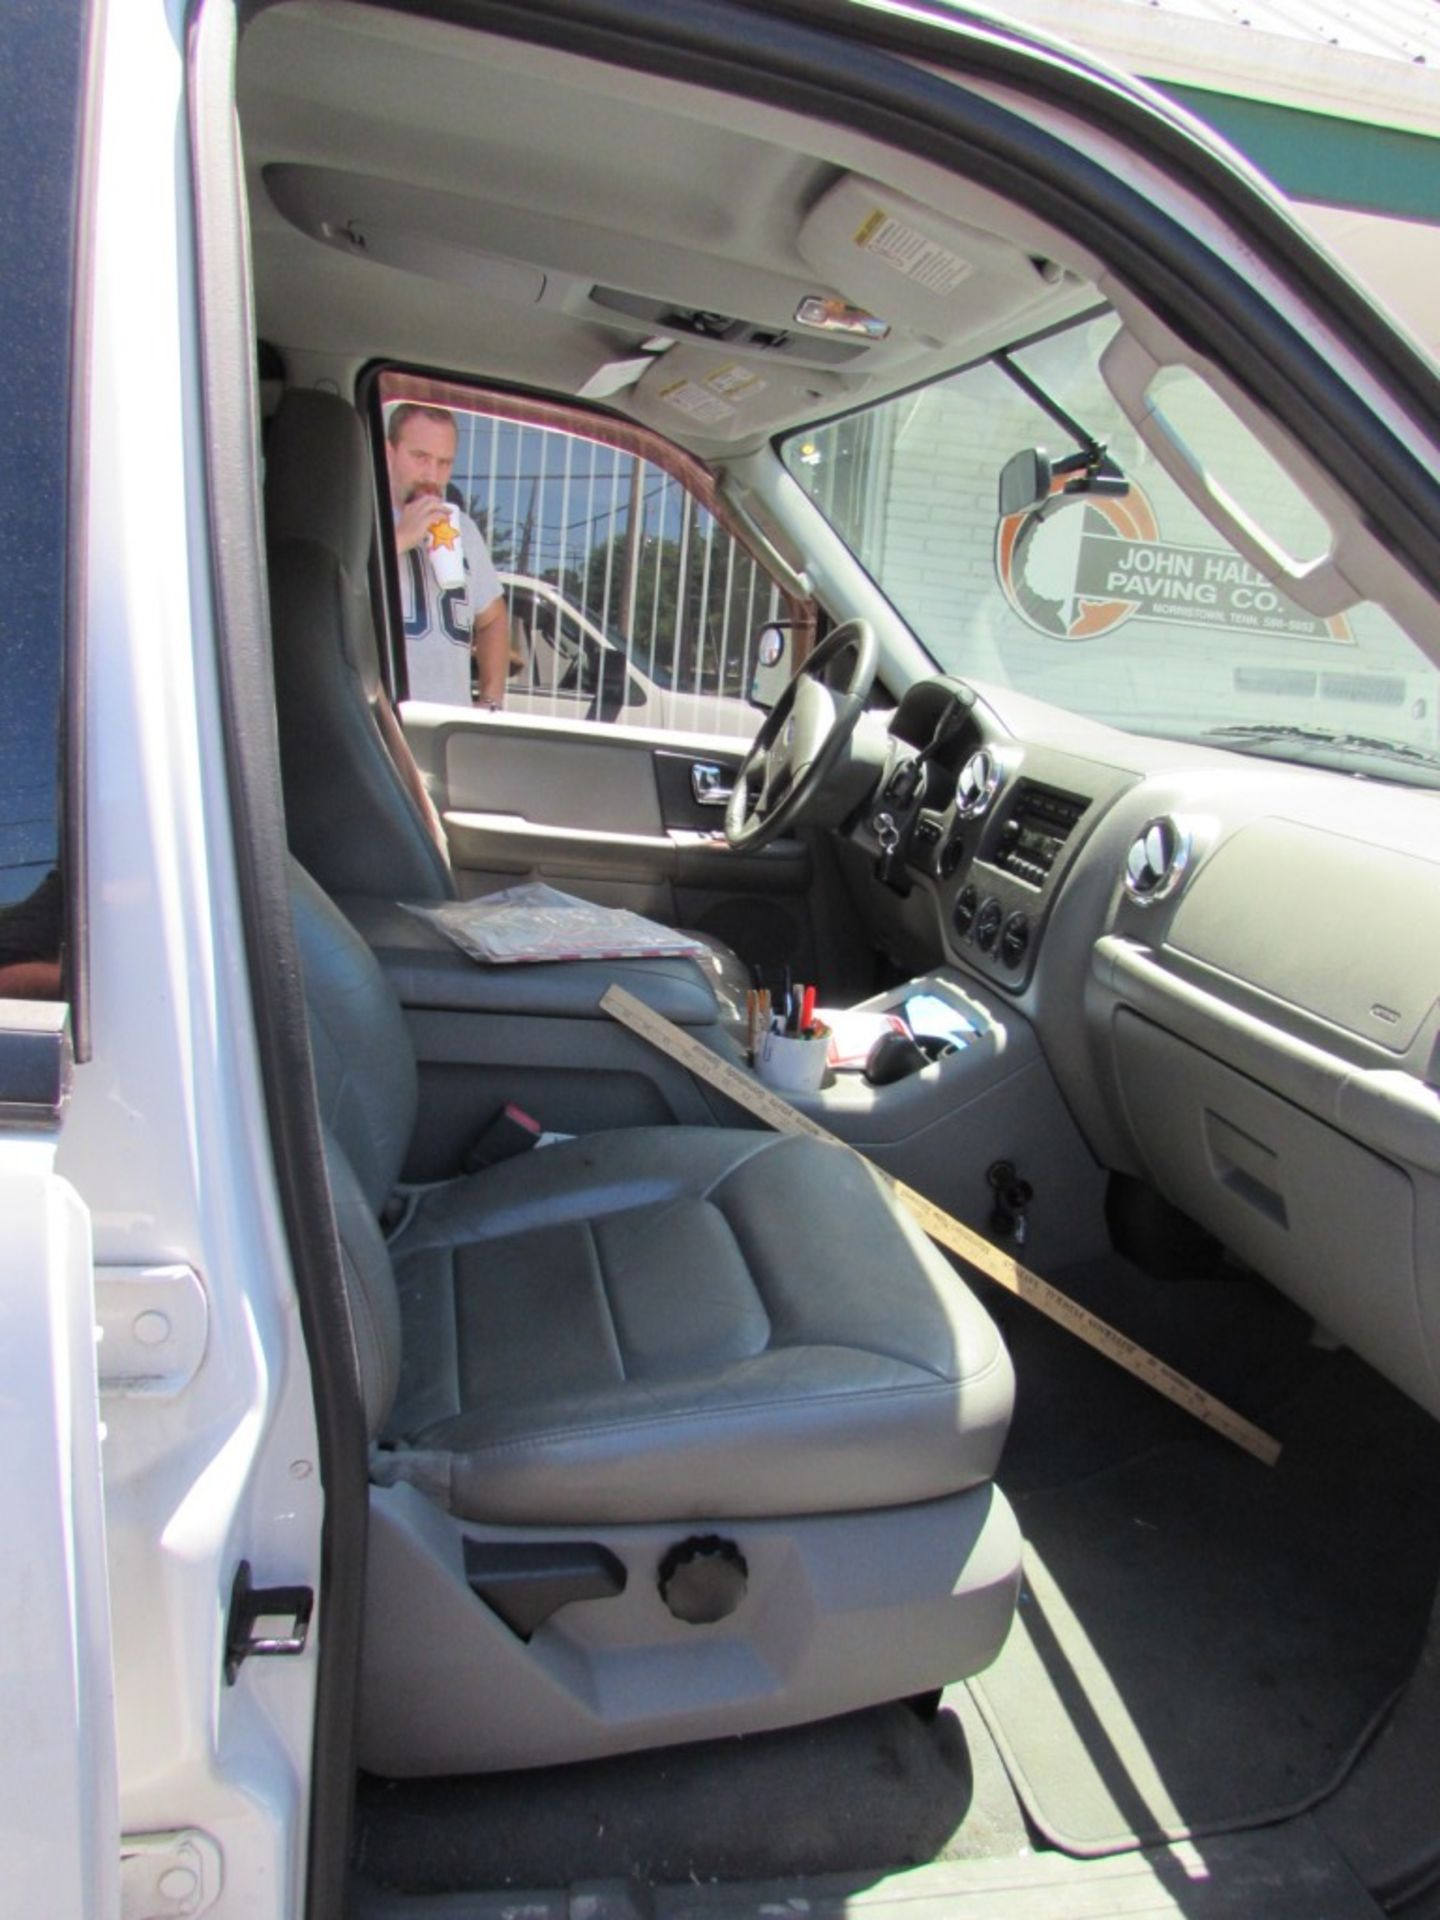 2006 Ford Expedition, V-8 Automatic, Leather, Power Windows, Power Door, 2-WD ODO 70,341, Vin - Image 5 of 5